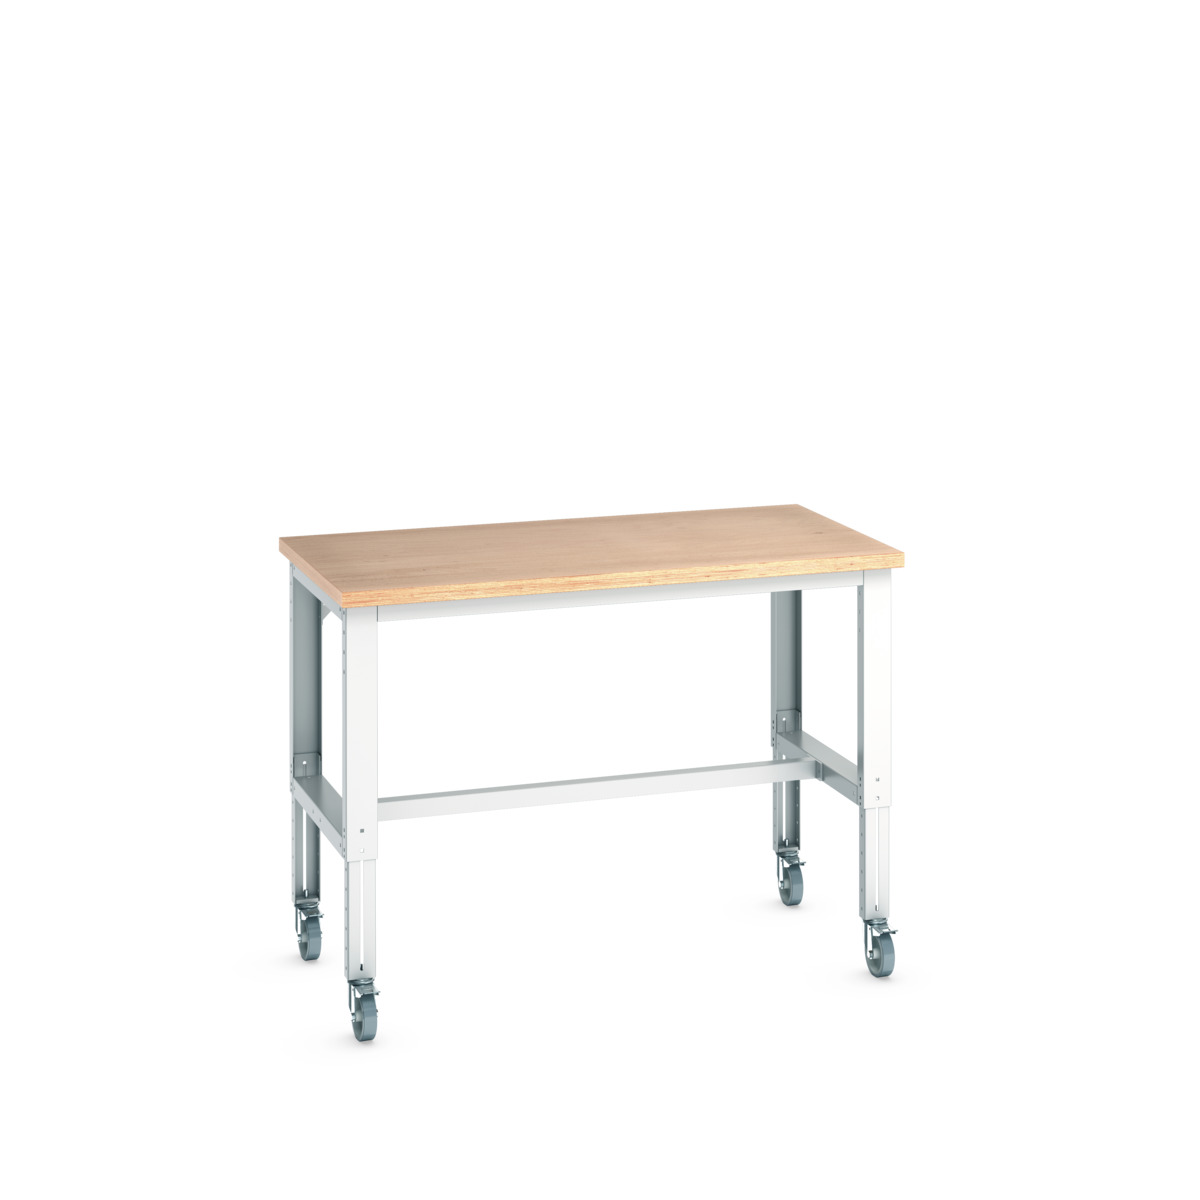 41004141.16V - cubio mobile bench adj height (mpx)